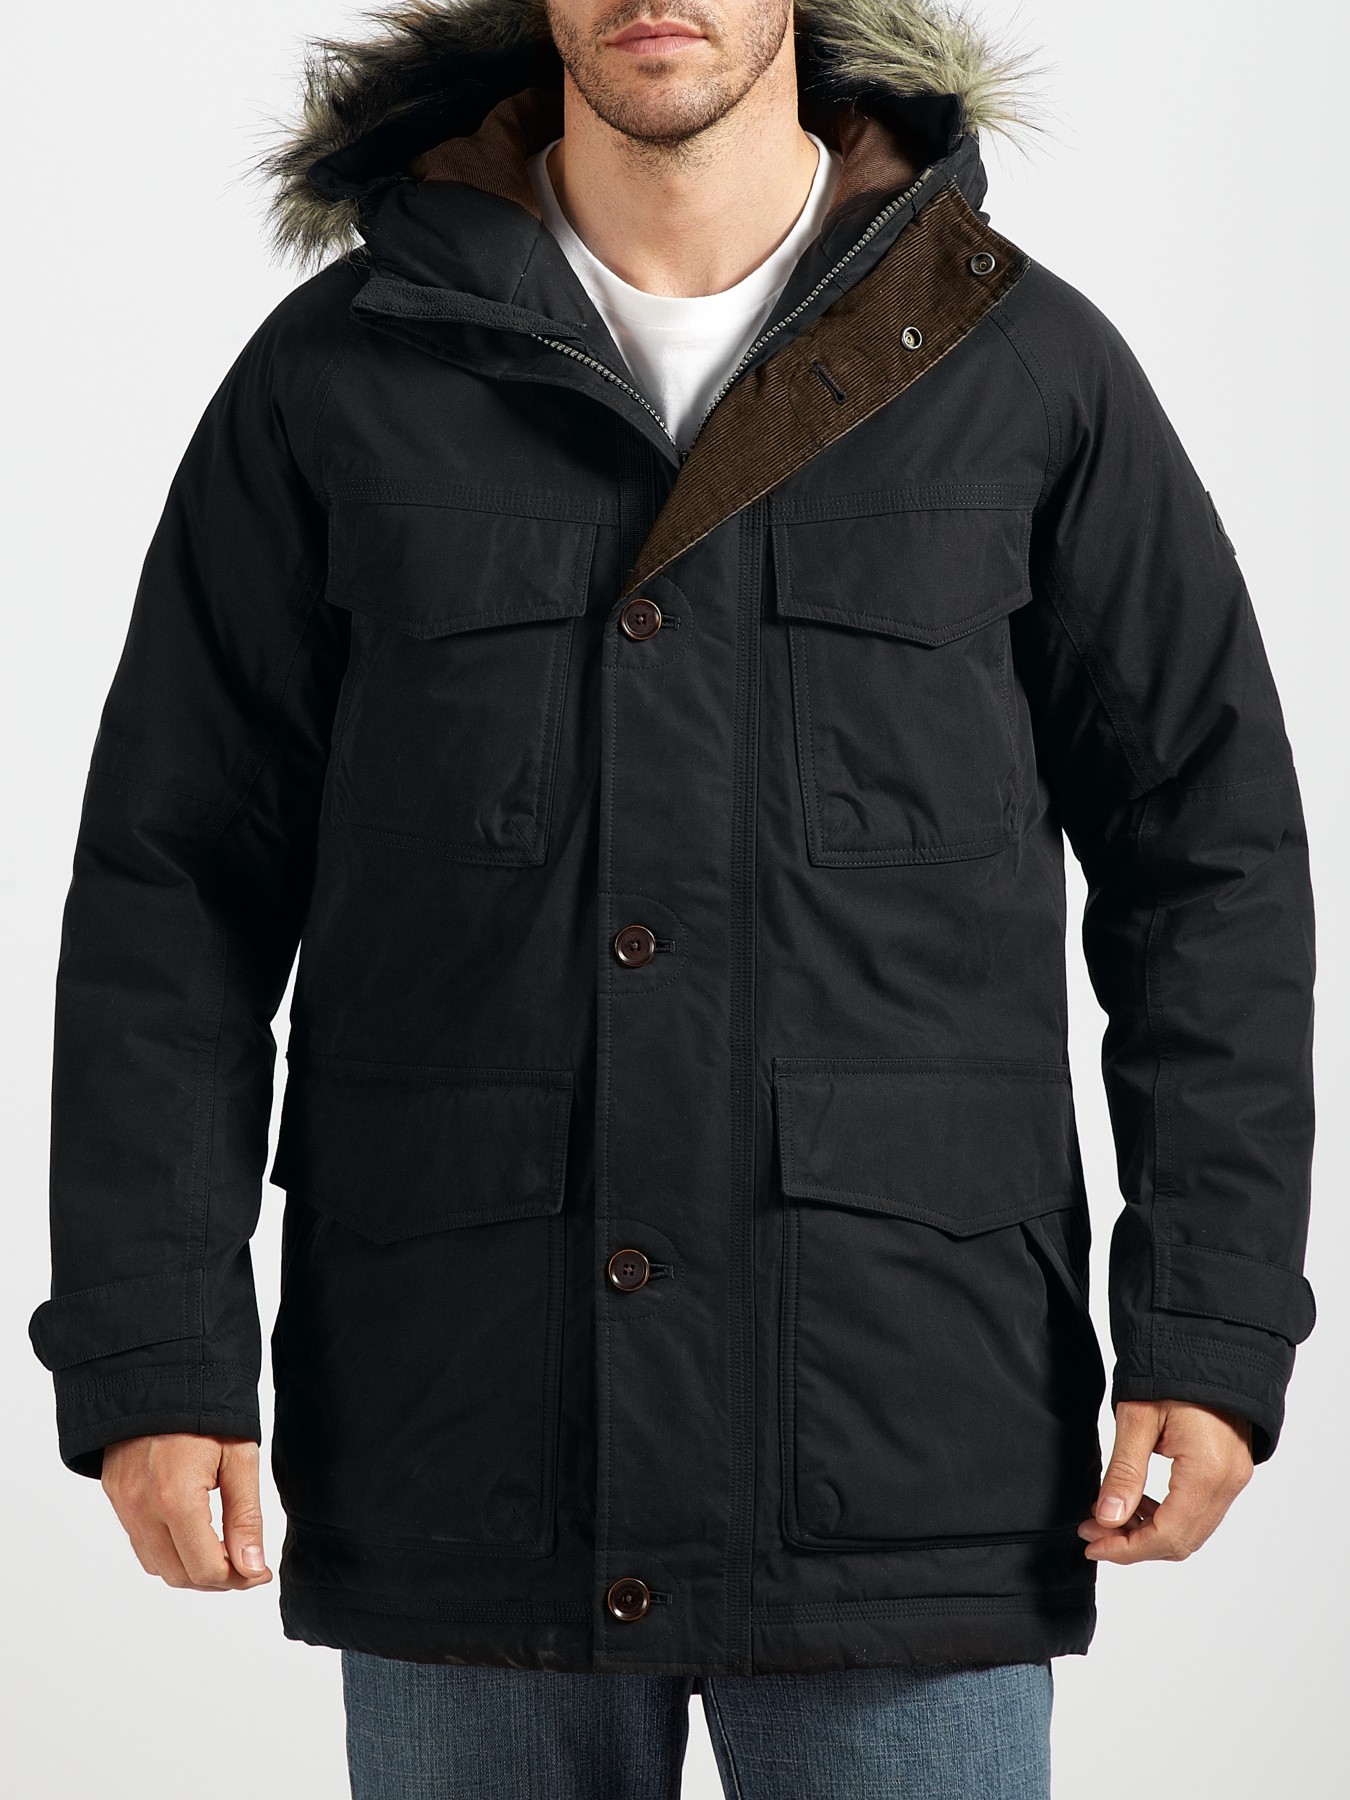 Timberland Wilmington Long Parka Jacket in Black for Men - Lyst